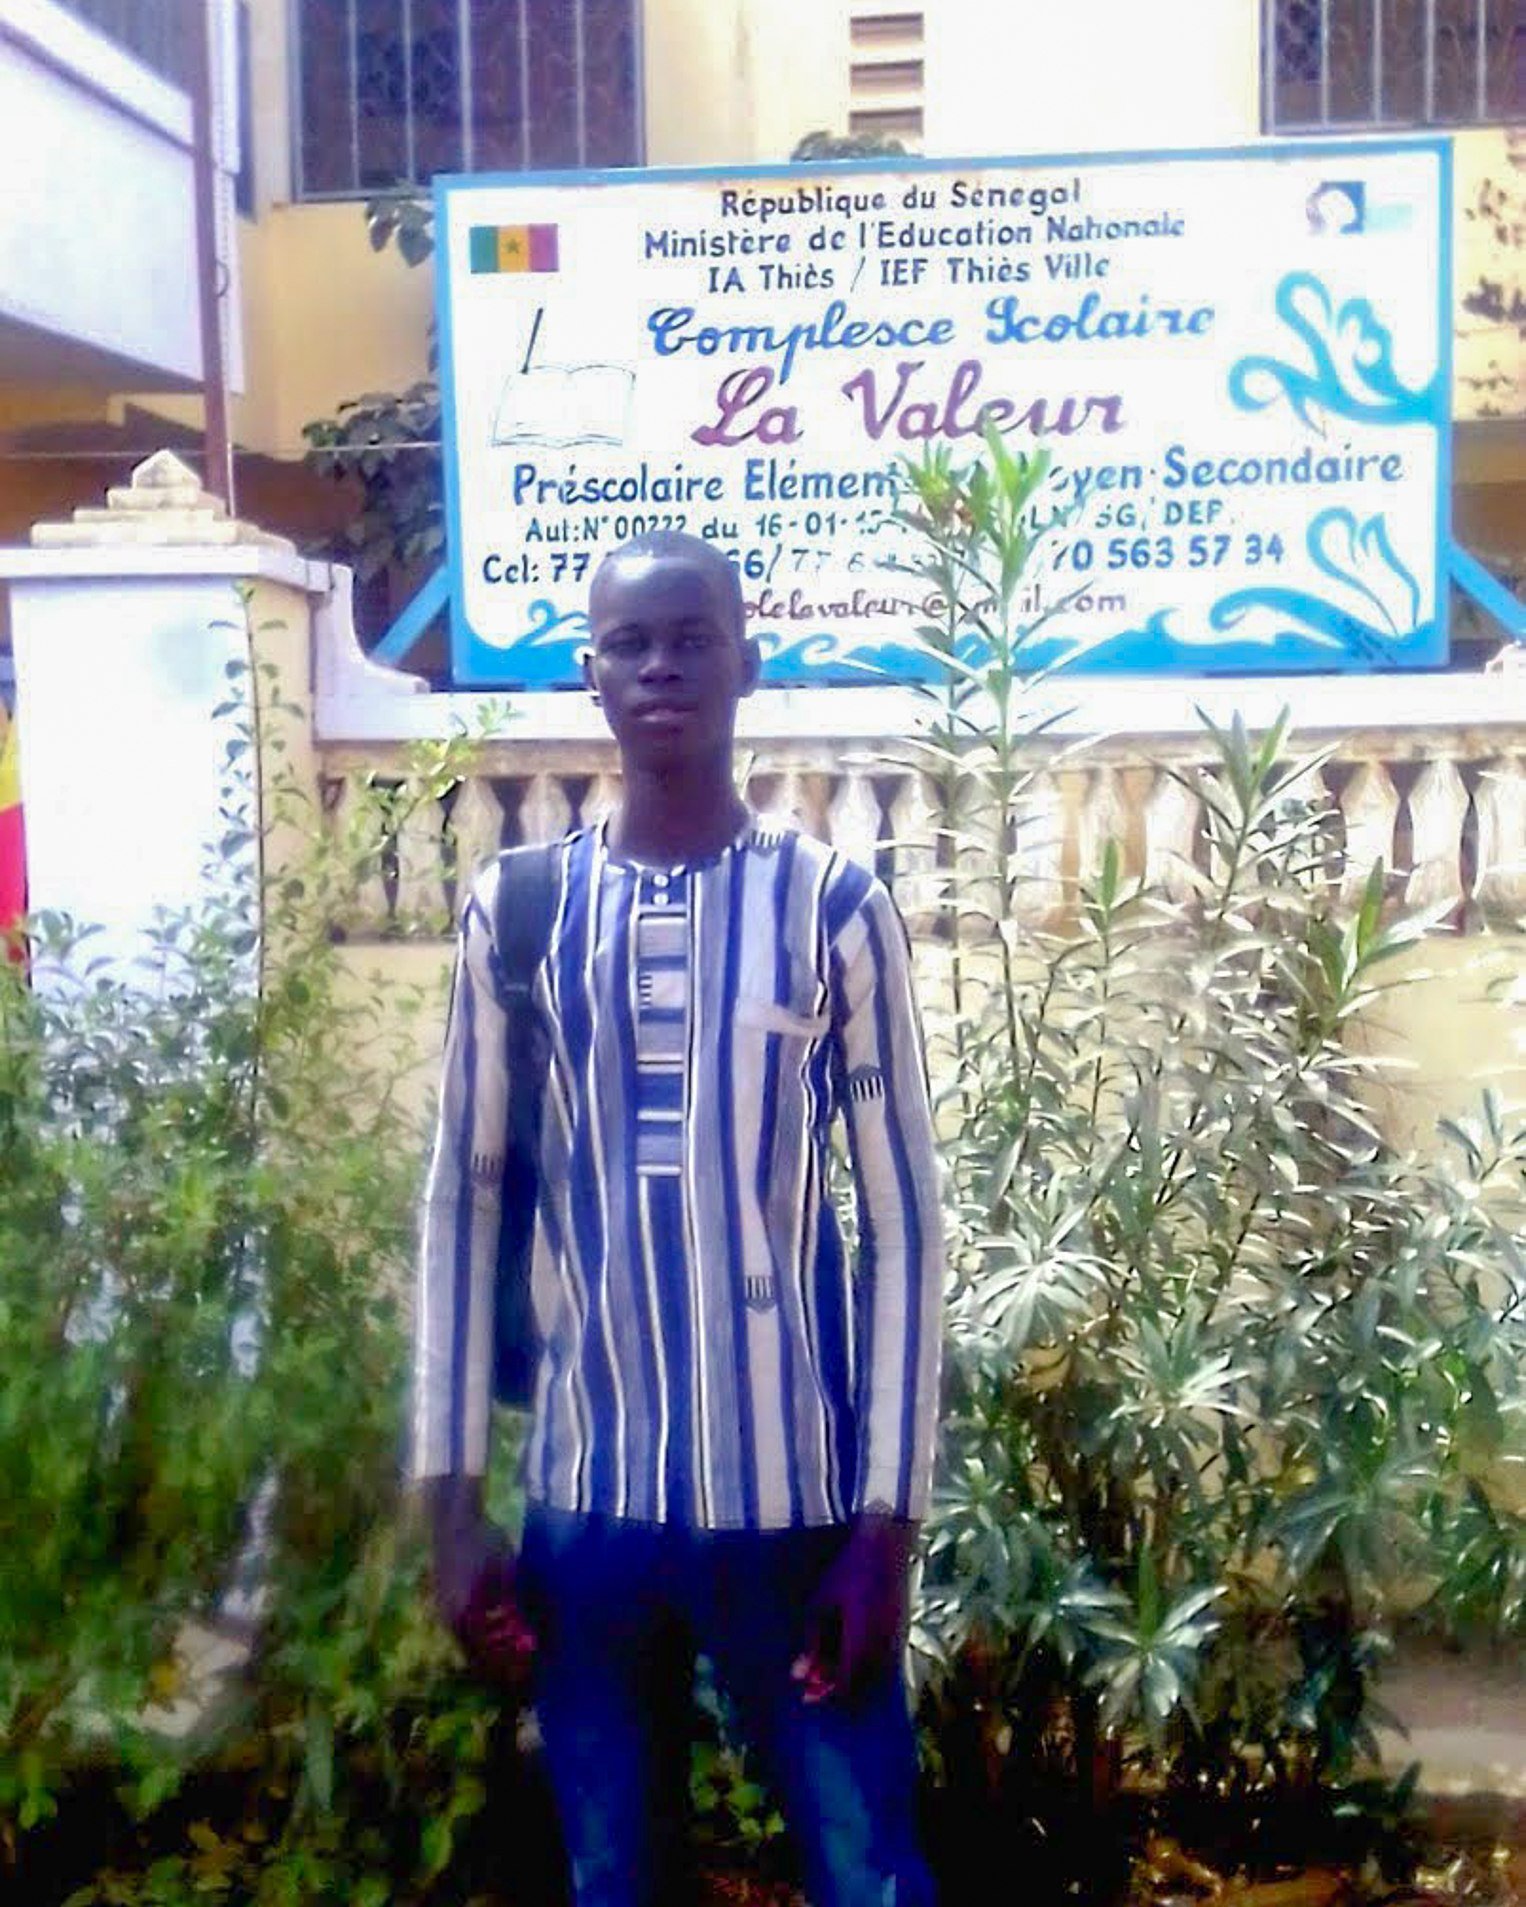 Fran&ccedil;ois Mbaye Diop is currently attending Senegal's Ministry of Education for early education training in Thi&egrave;s. His hope is to eventually bless Ngonine and the Light of the World School with his knowledge and expertise. 

He shares so